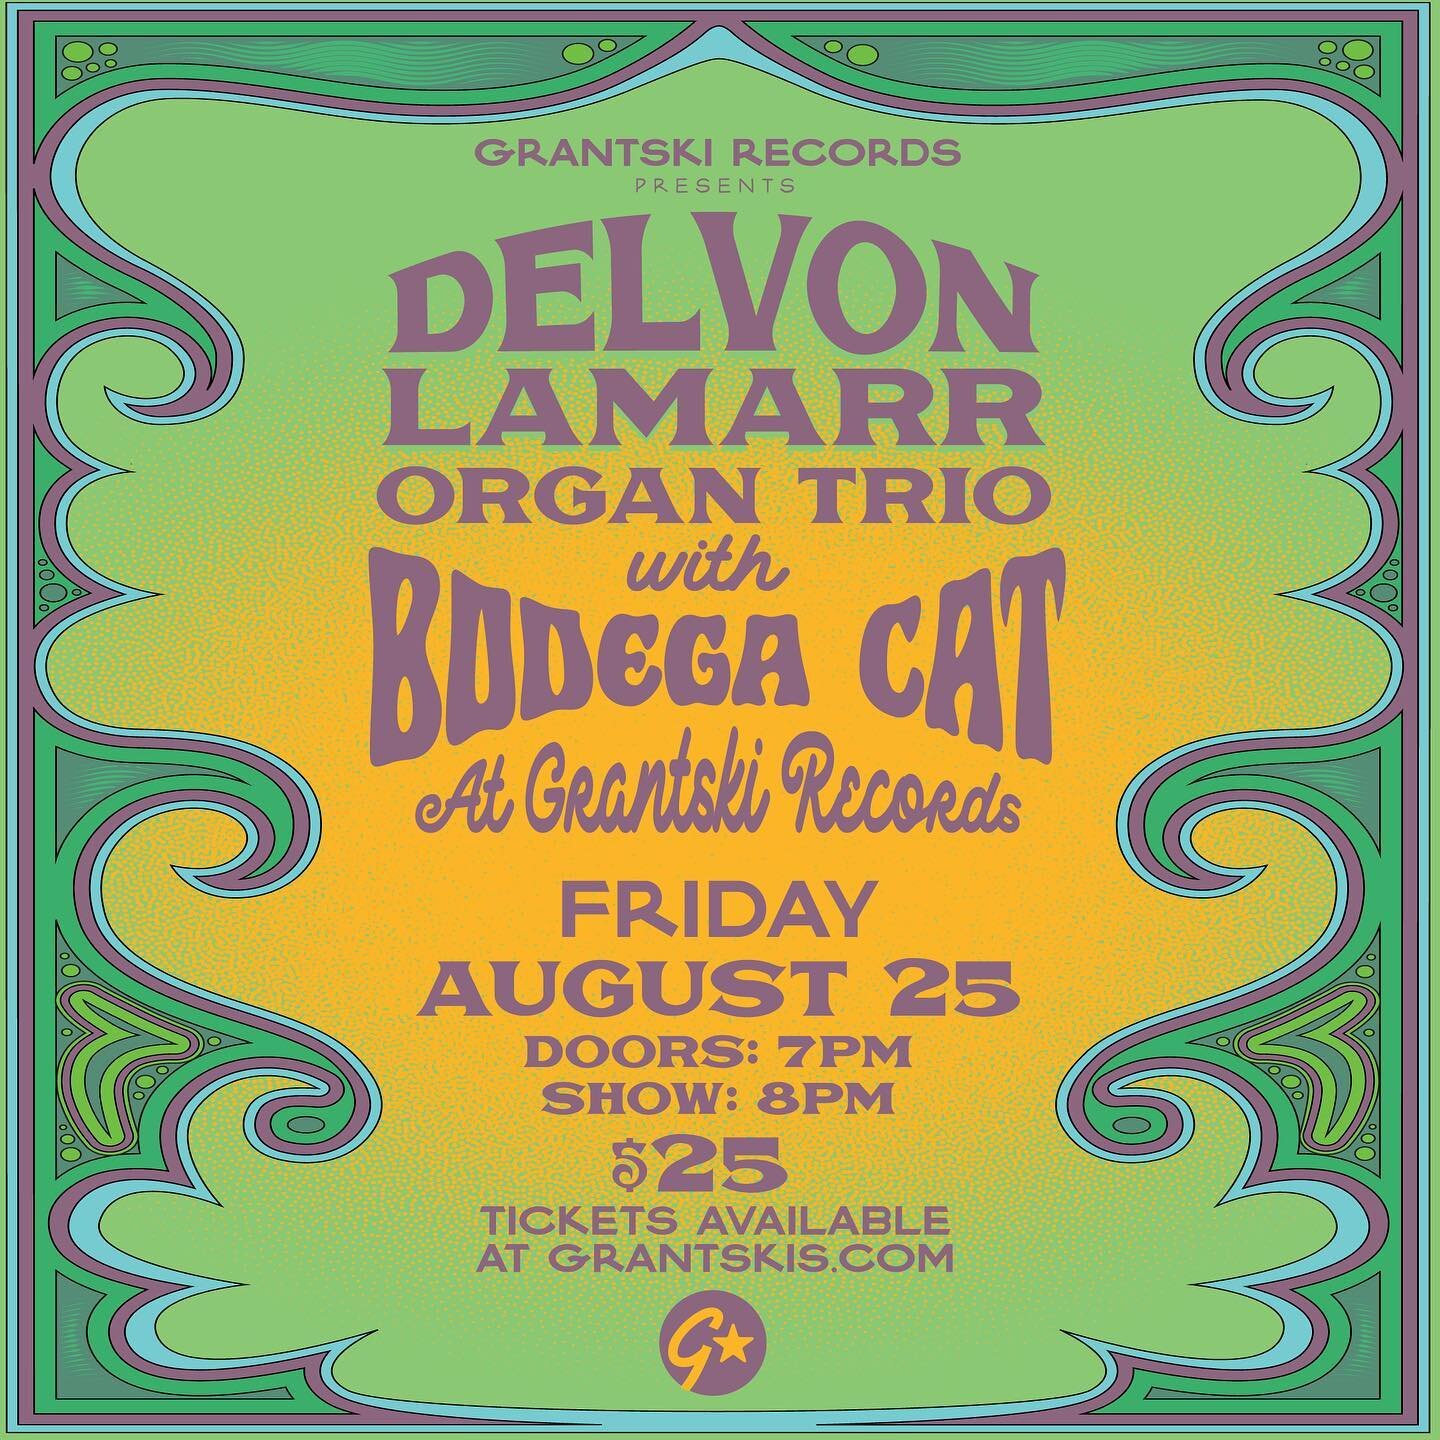 We&rsquo;re thrilled to get to warm up the stage for Delvon Lamar Organ Trio on 8/25 at Grantski Records!